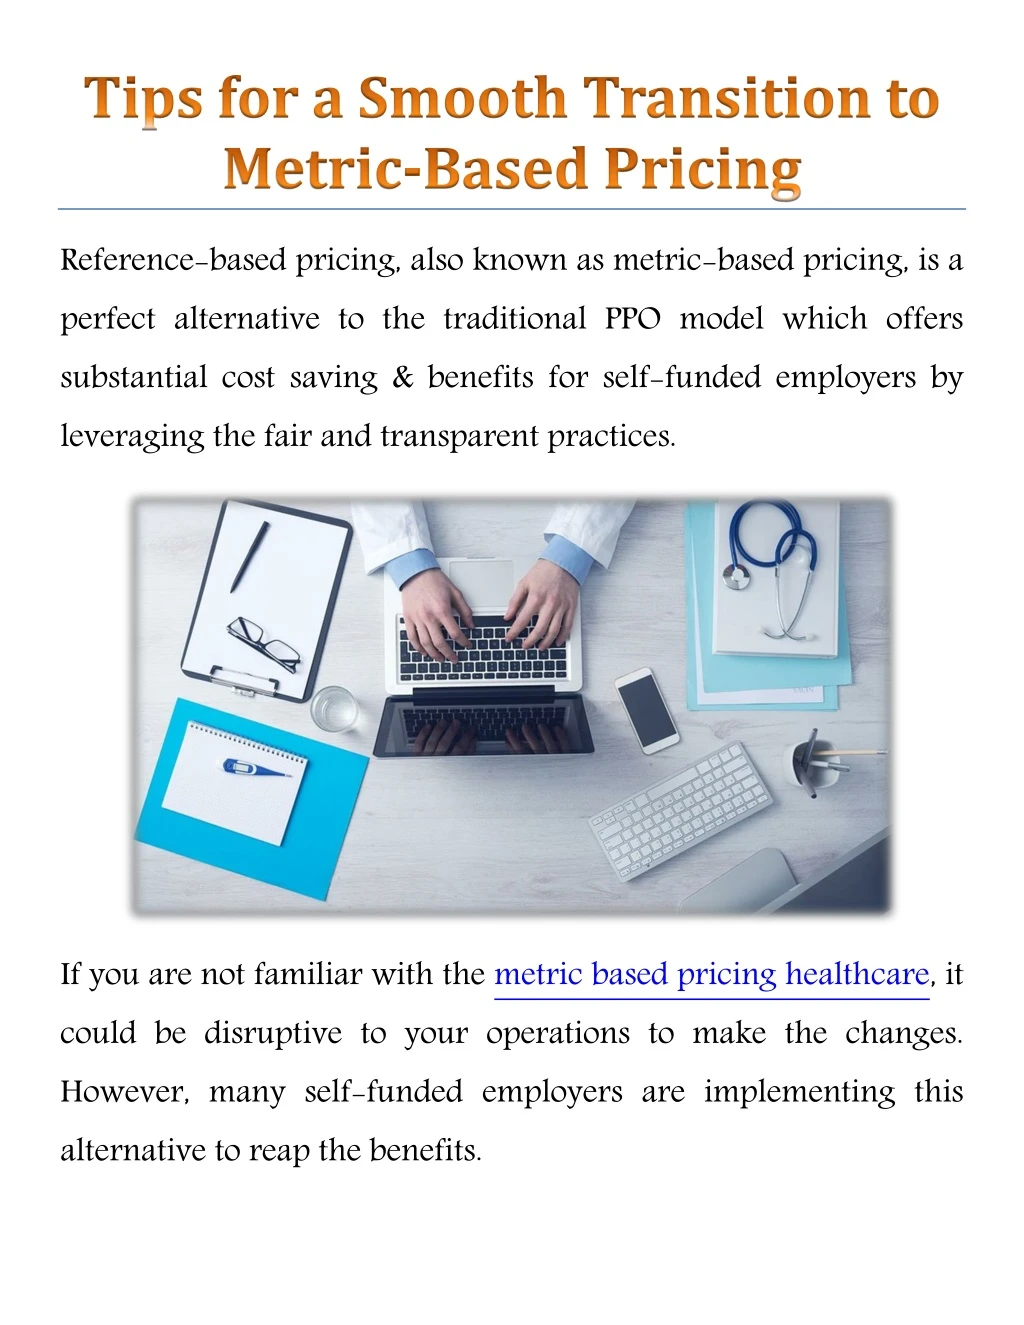 reference based pricing also known as metric